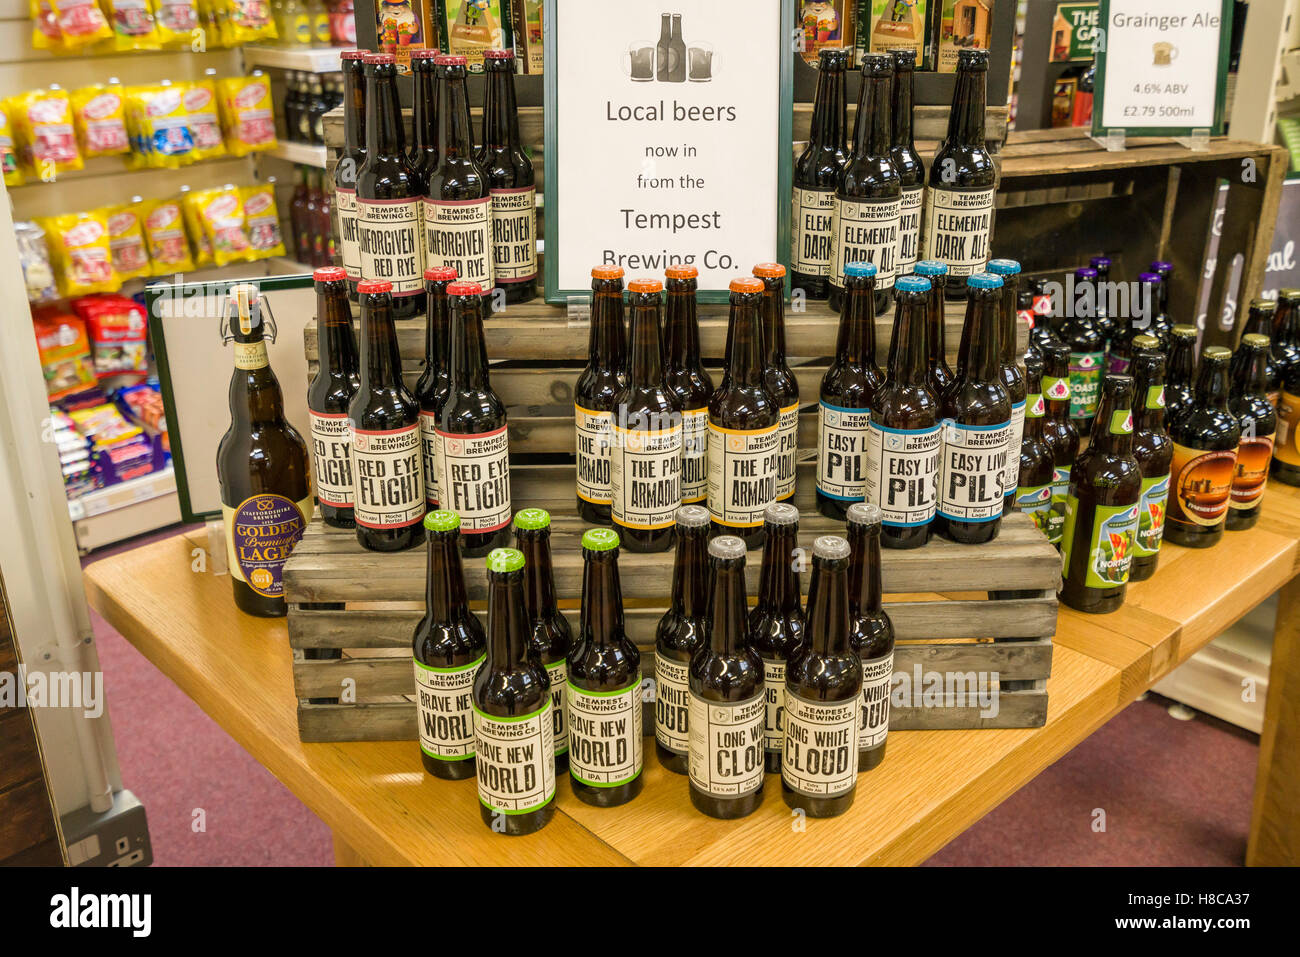 Tempest craft brewery beers on sale in garden centre - local beers. Kelso, Scotland. Stock Photo